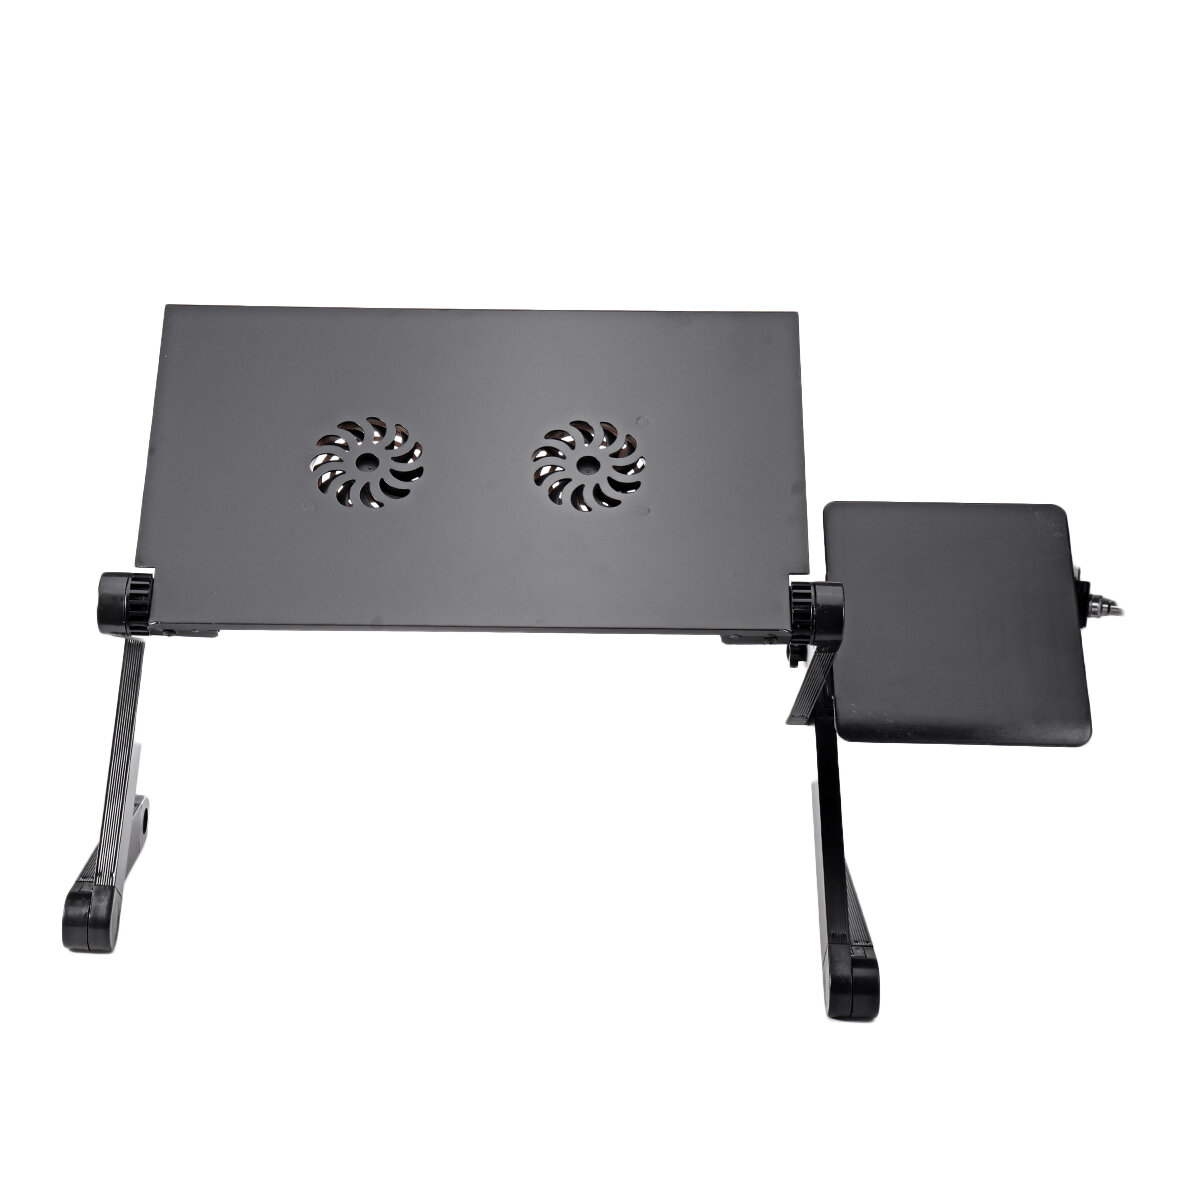 Adjustable Folding Notebook Laptop Stand Desk Table USB Cooling Pad 2 Fans Sofa Bed Tray Bracket with Mouse Board